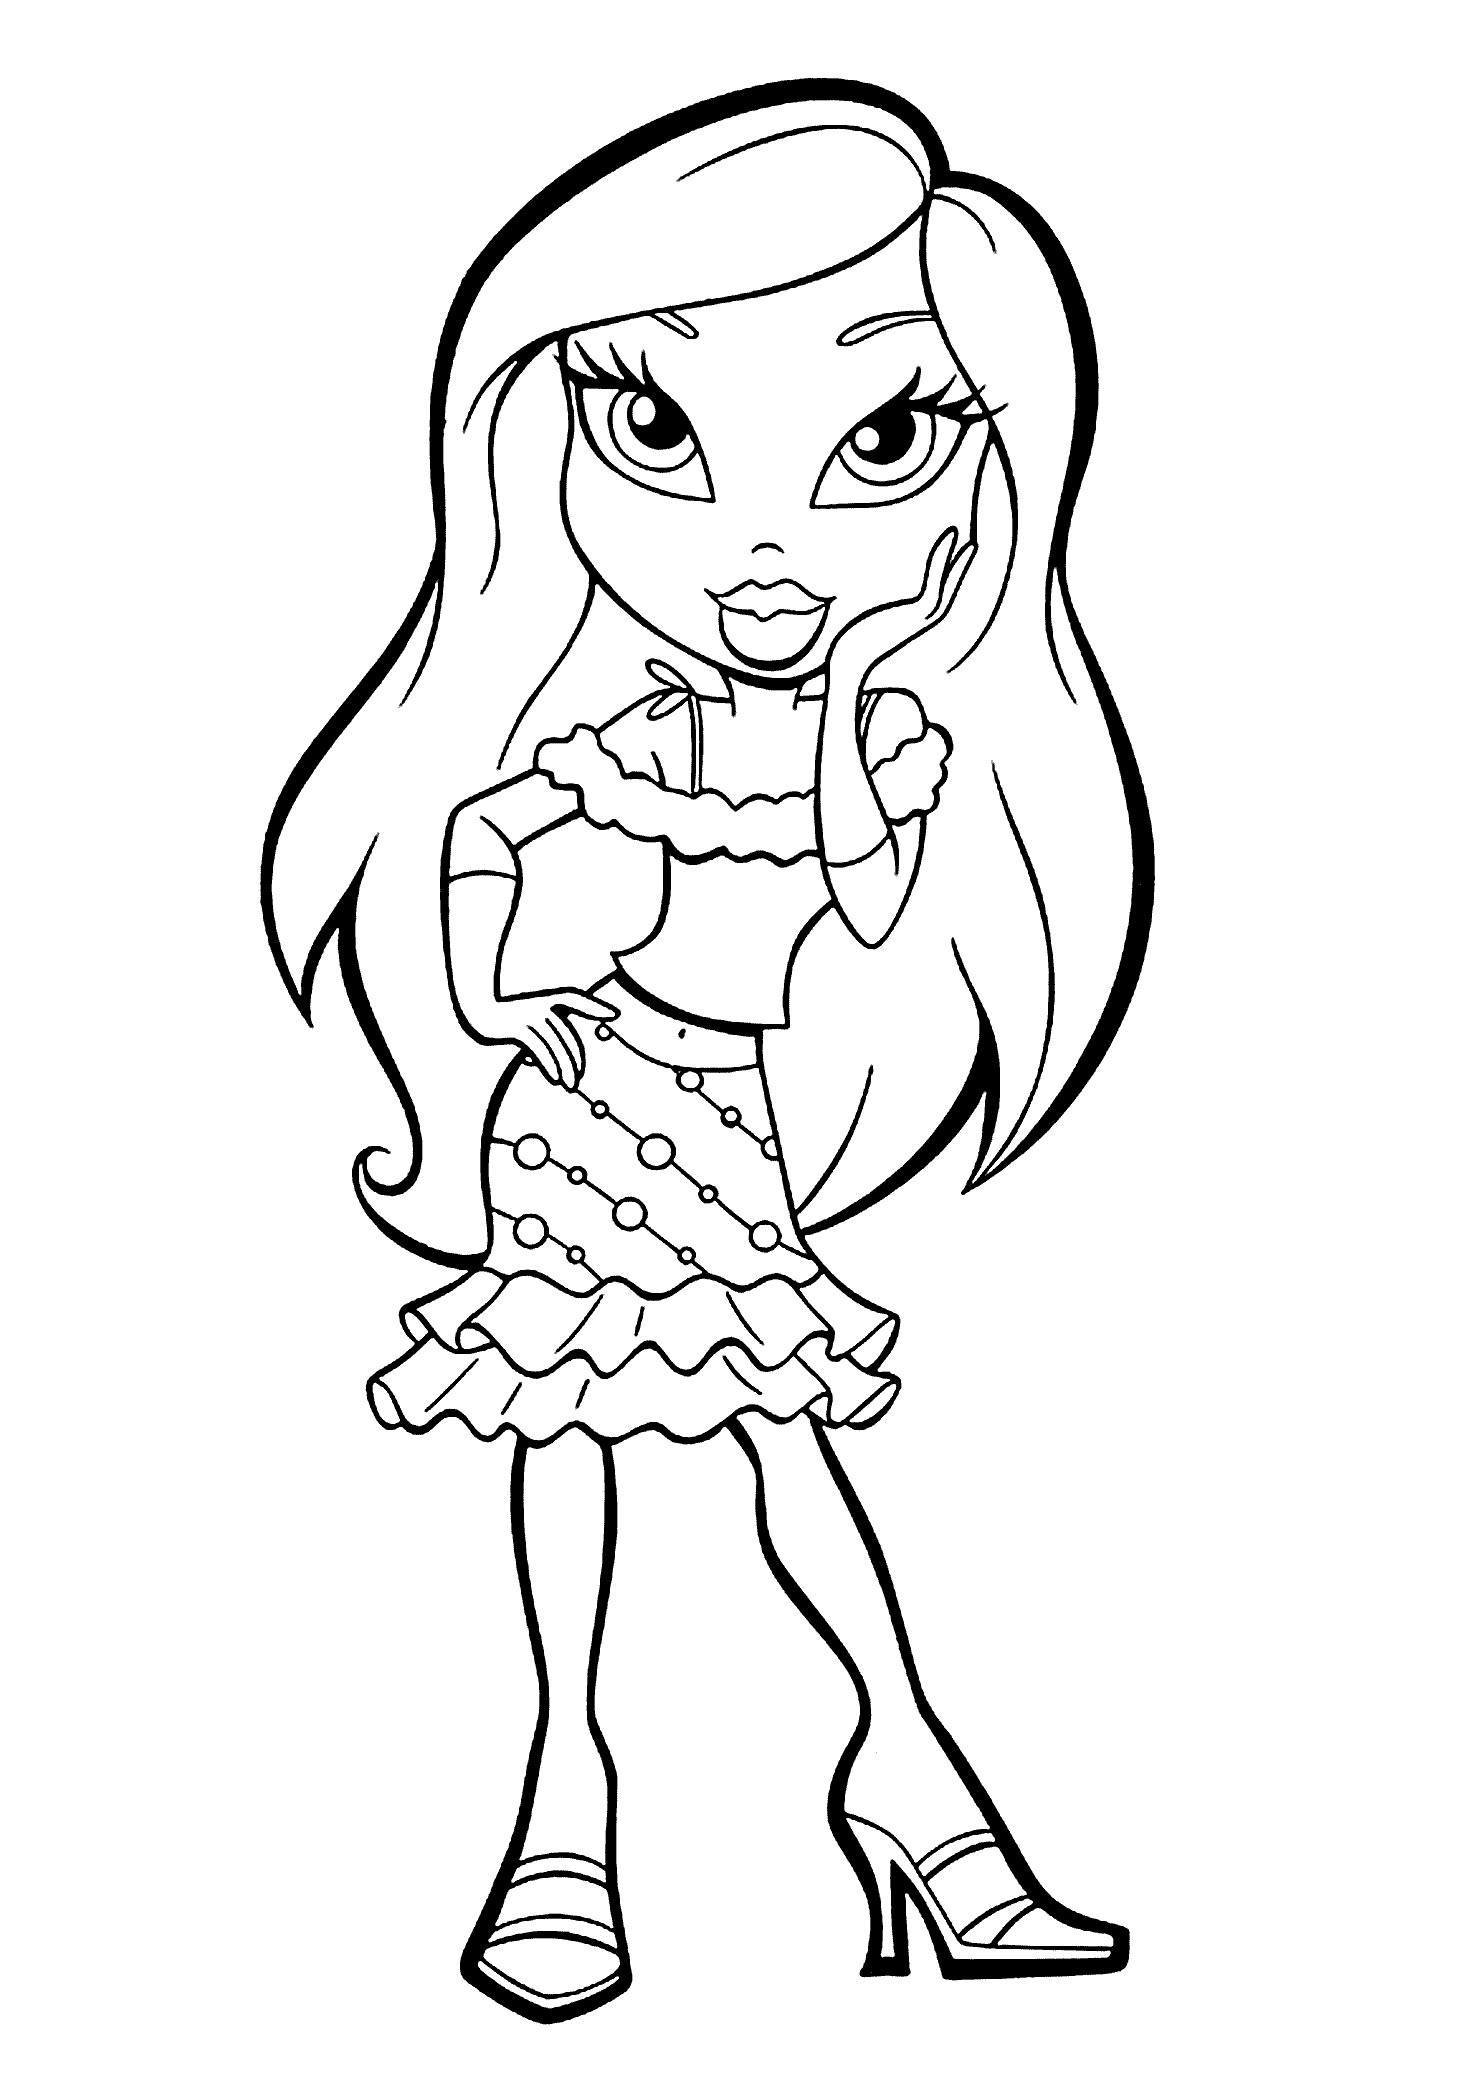 Bratz Printable Coloring Page Sheets - Coloring Pages For All Ages